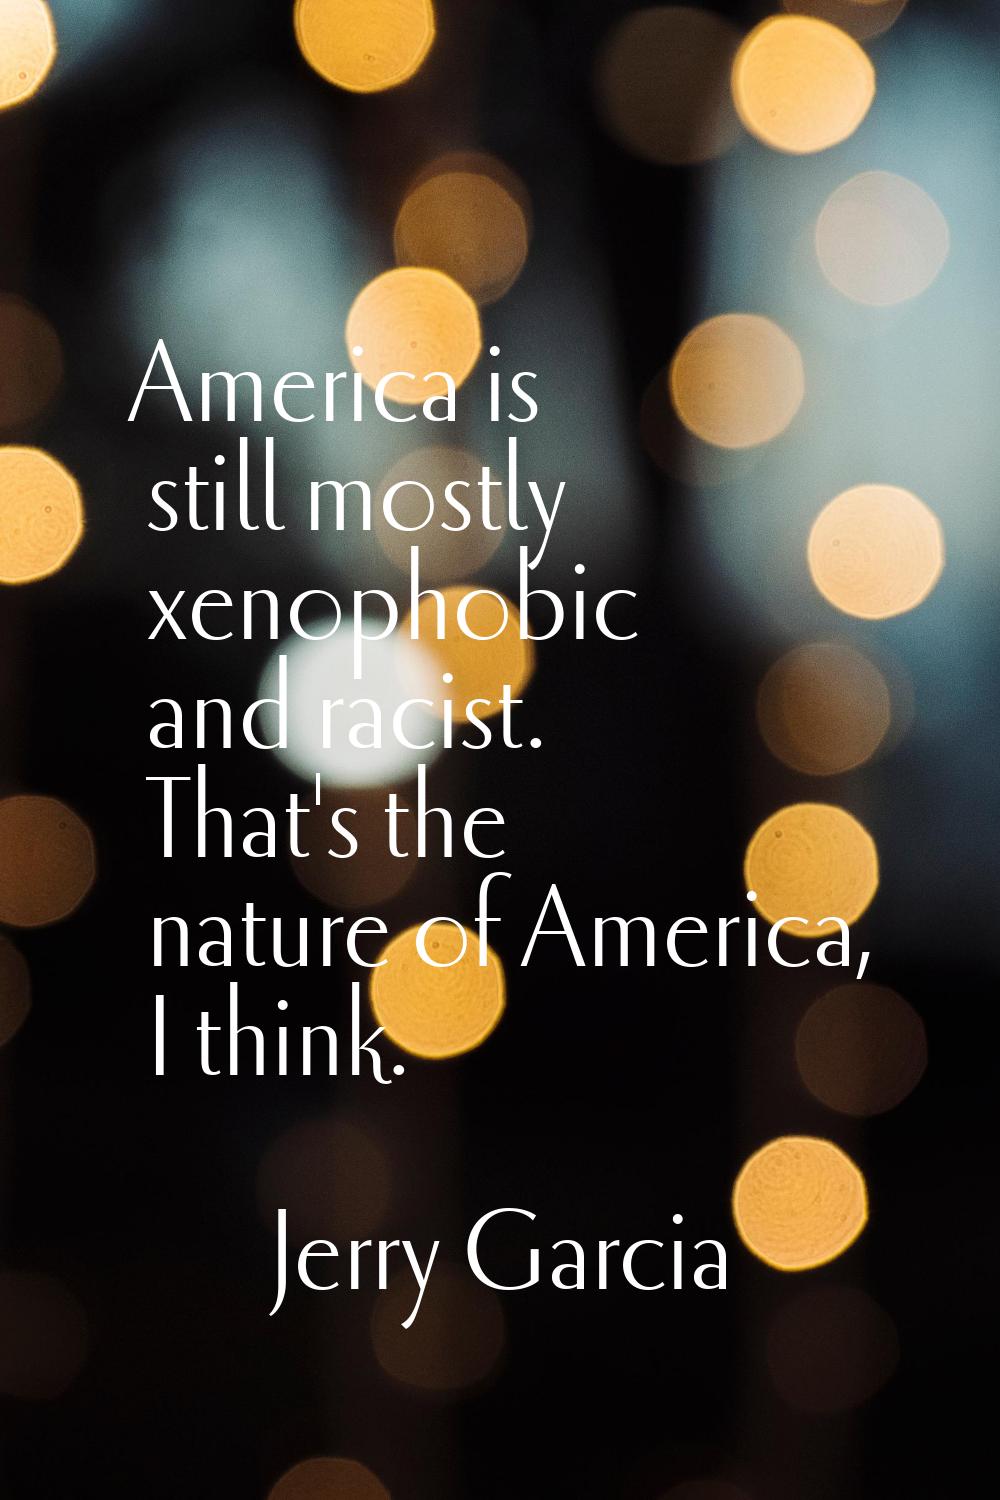 America is still mostly xenophobic and racist. That's the nature of America, I think.